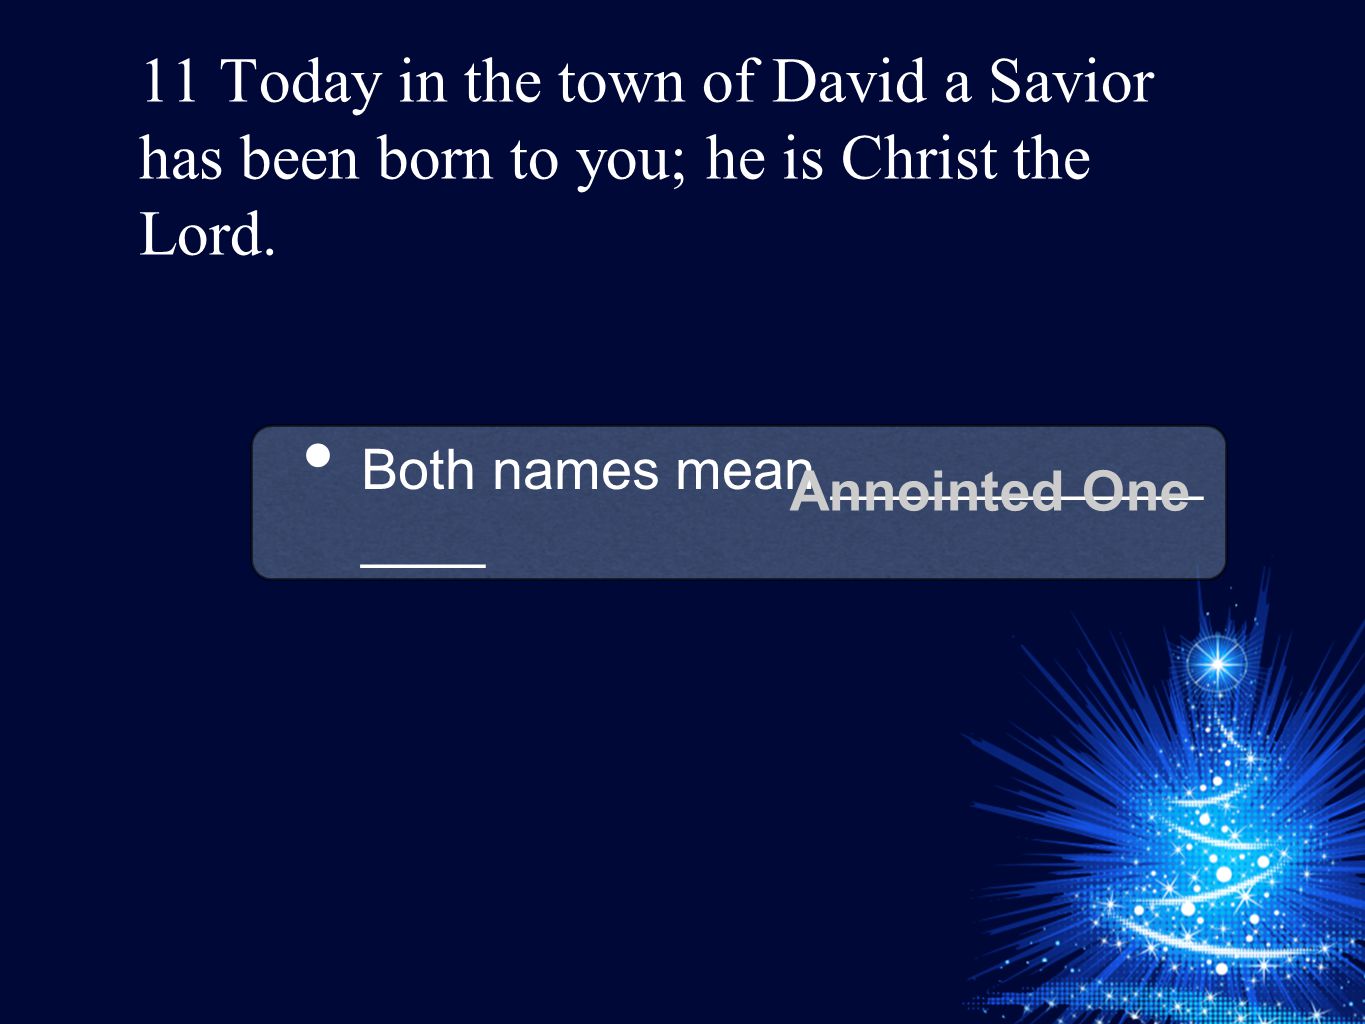 11 Today in the town of David a Savior has been born to you; he is Christ the Lord.